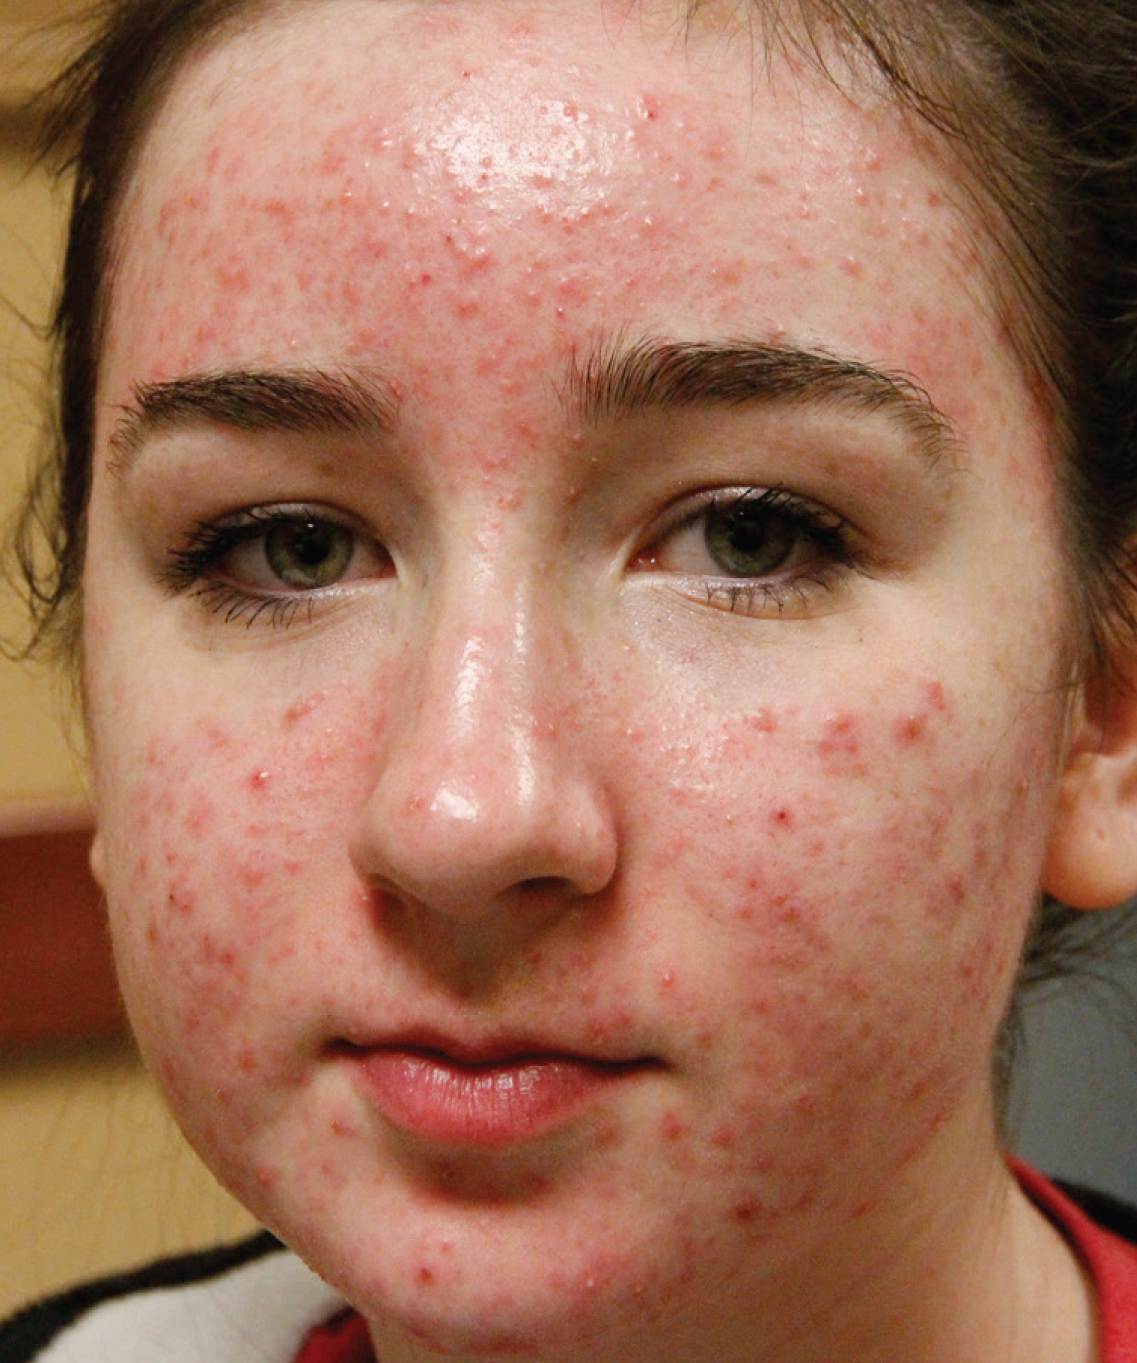 image showing girl with acne